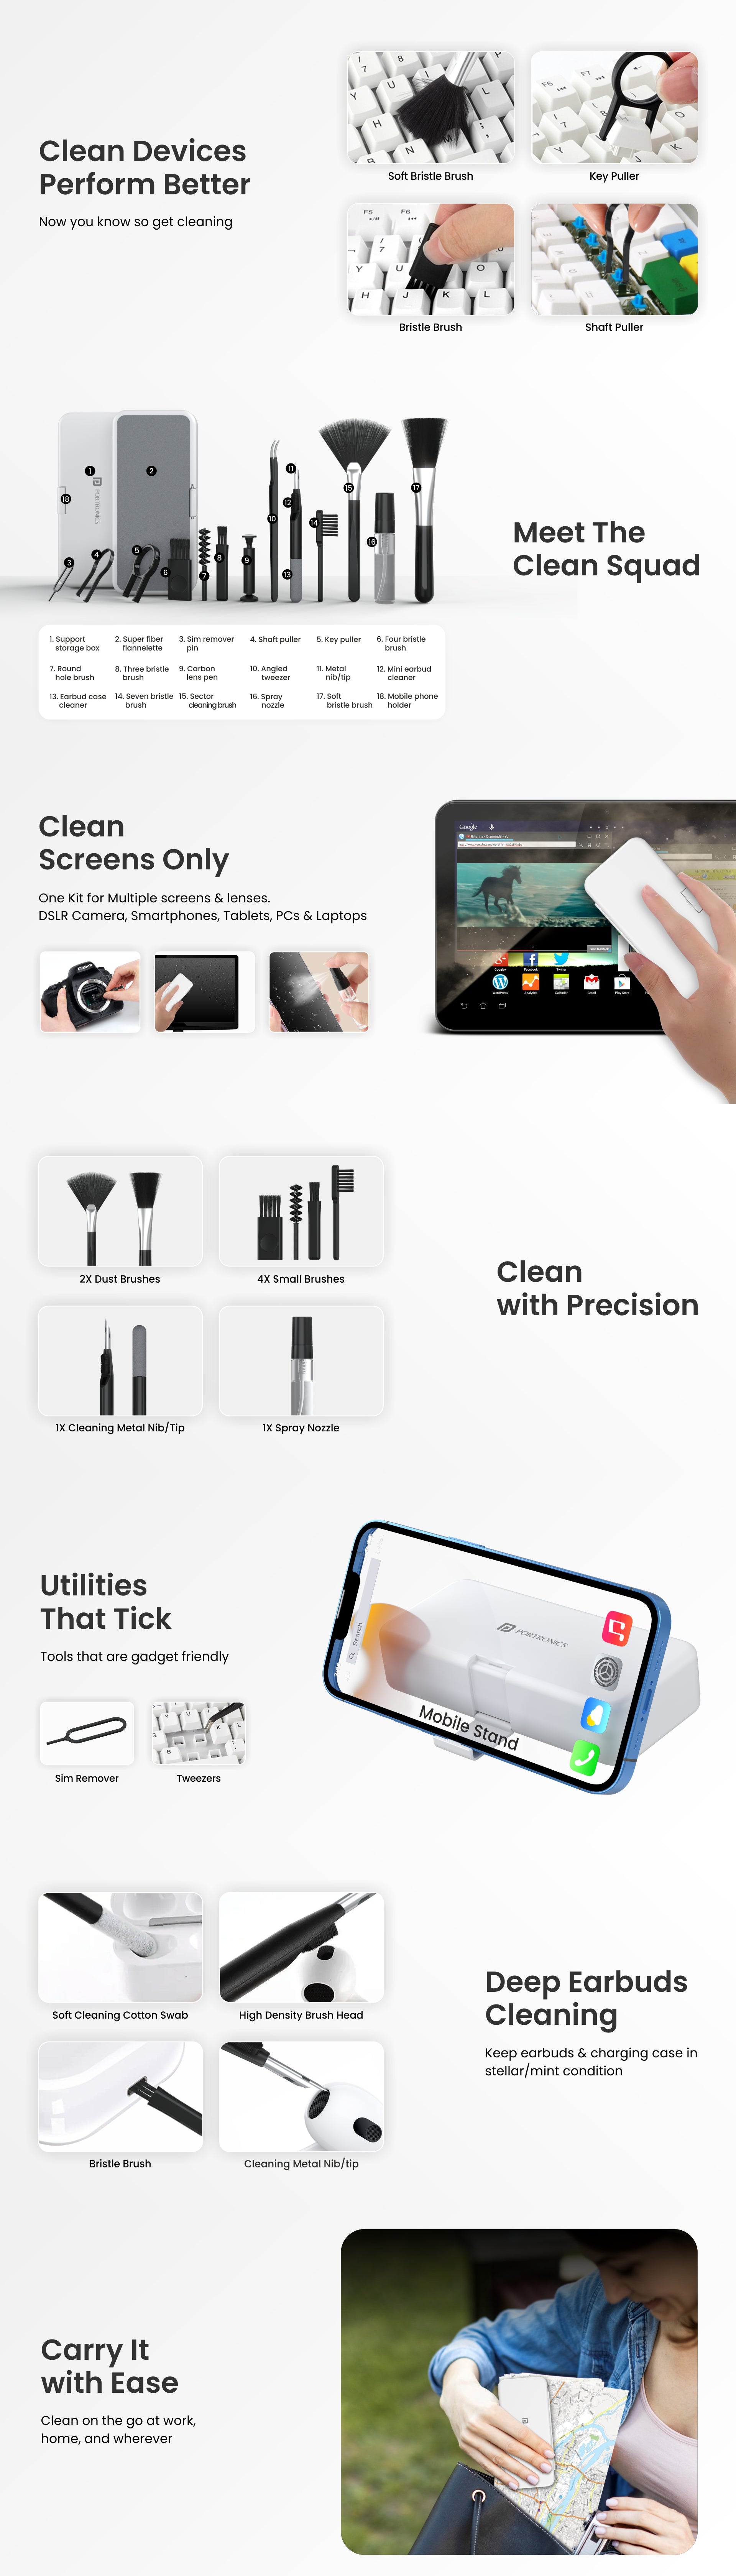 Get cleaning with smart gadget cleaner